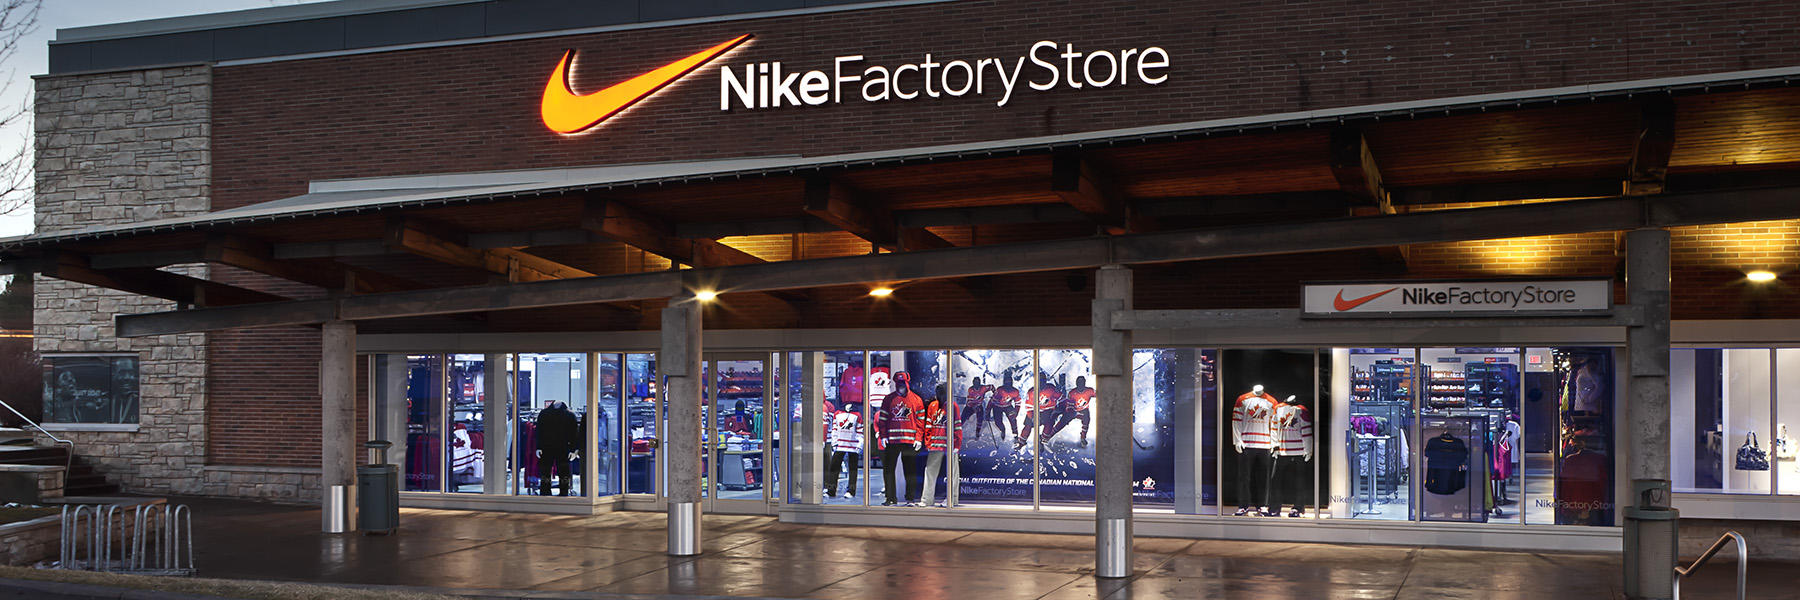 new york outlet nike